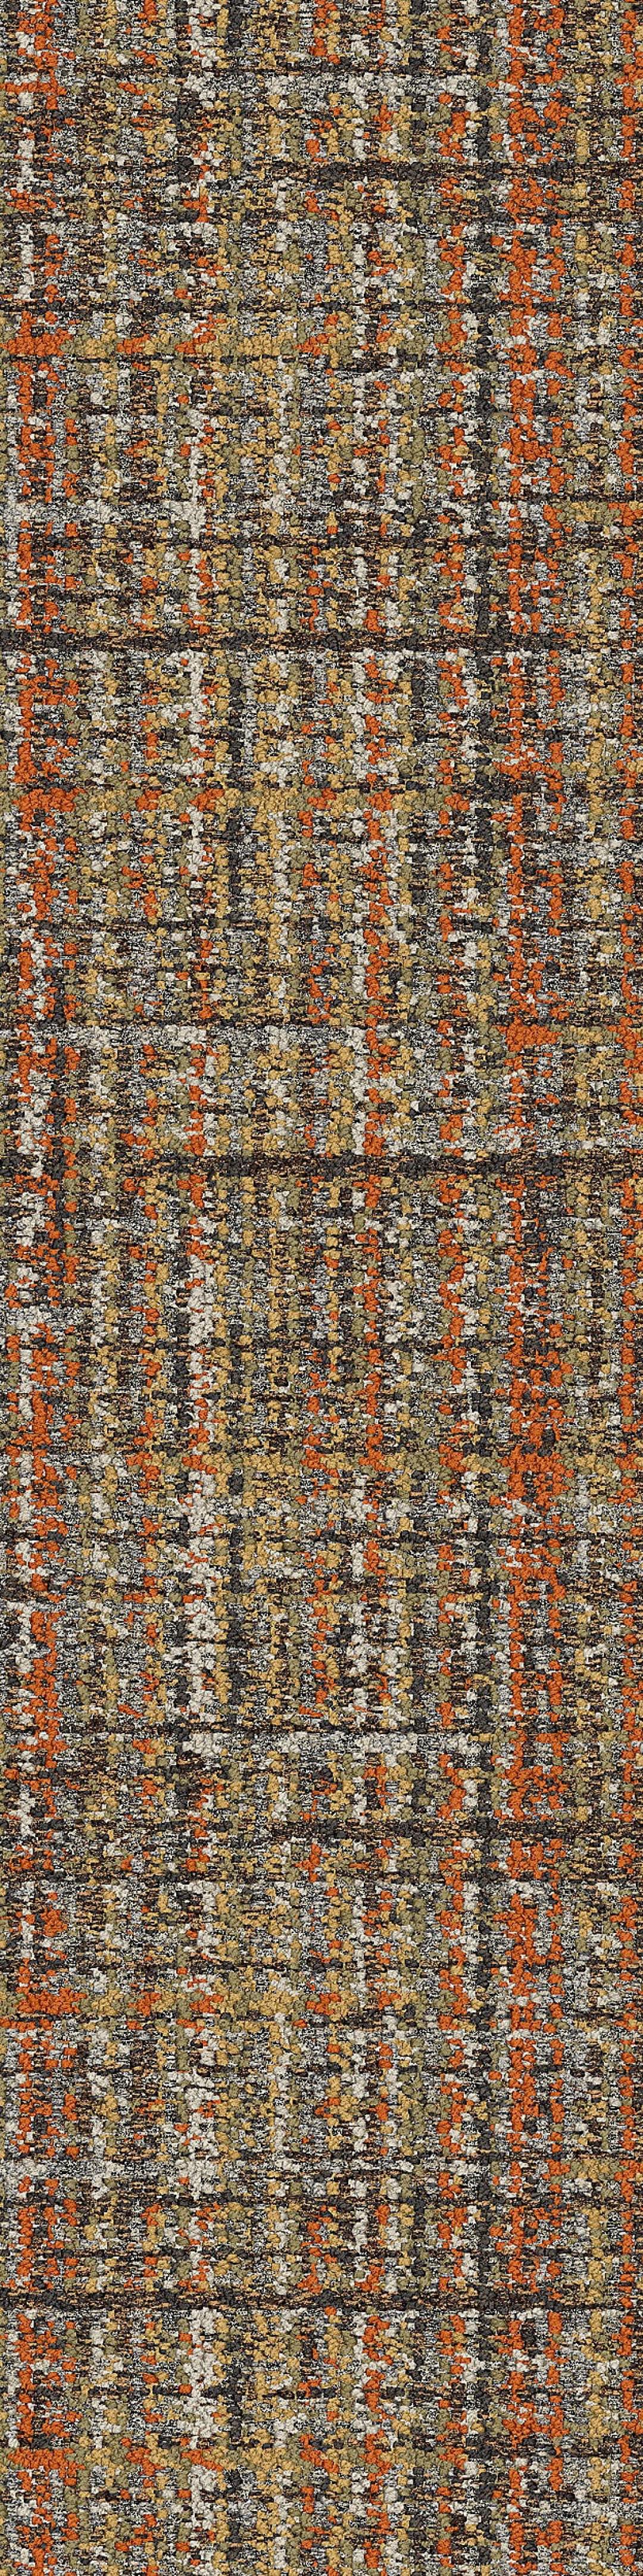 World Woven - WW895 - Autumn Weave from Inzide